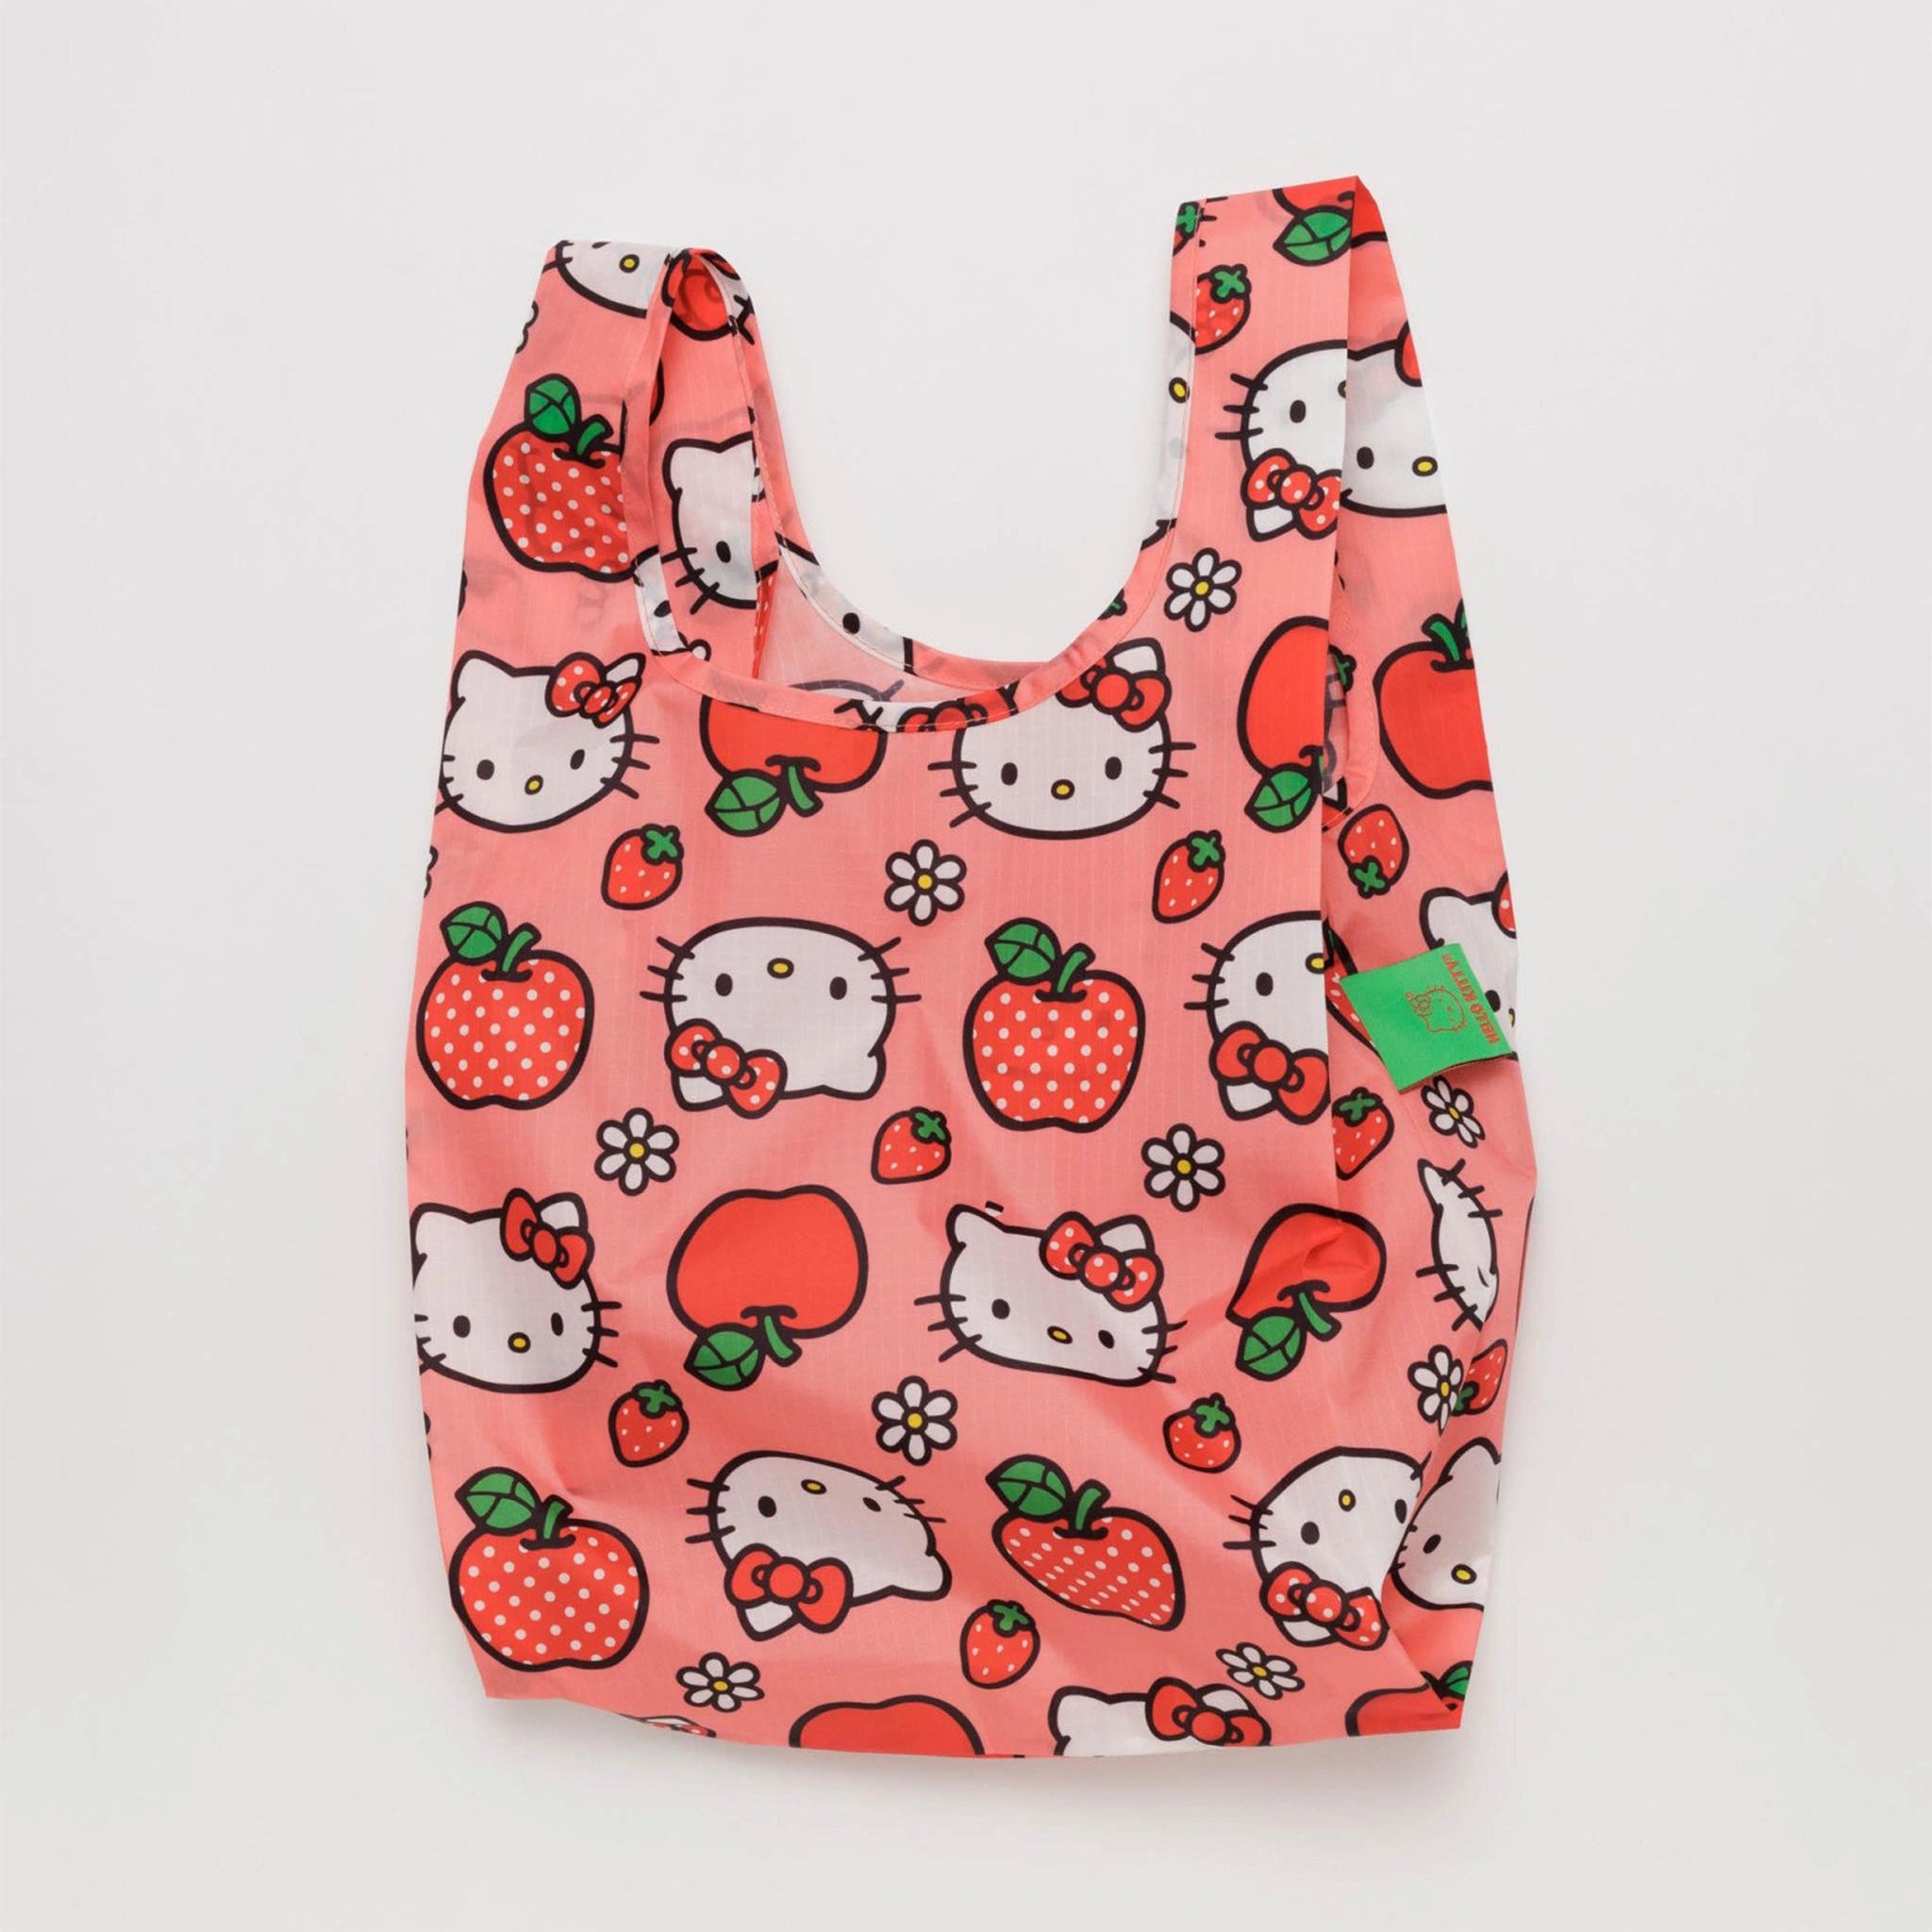 On a white background is a hello kitty and apple printed nylon tote bag. 